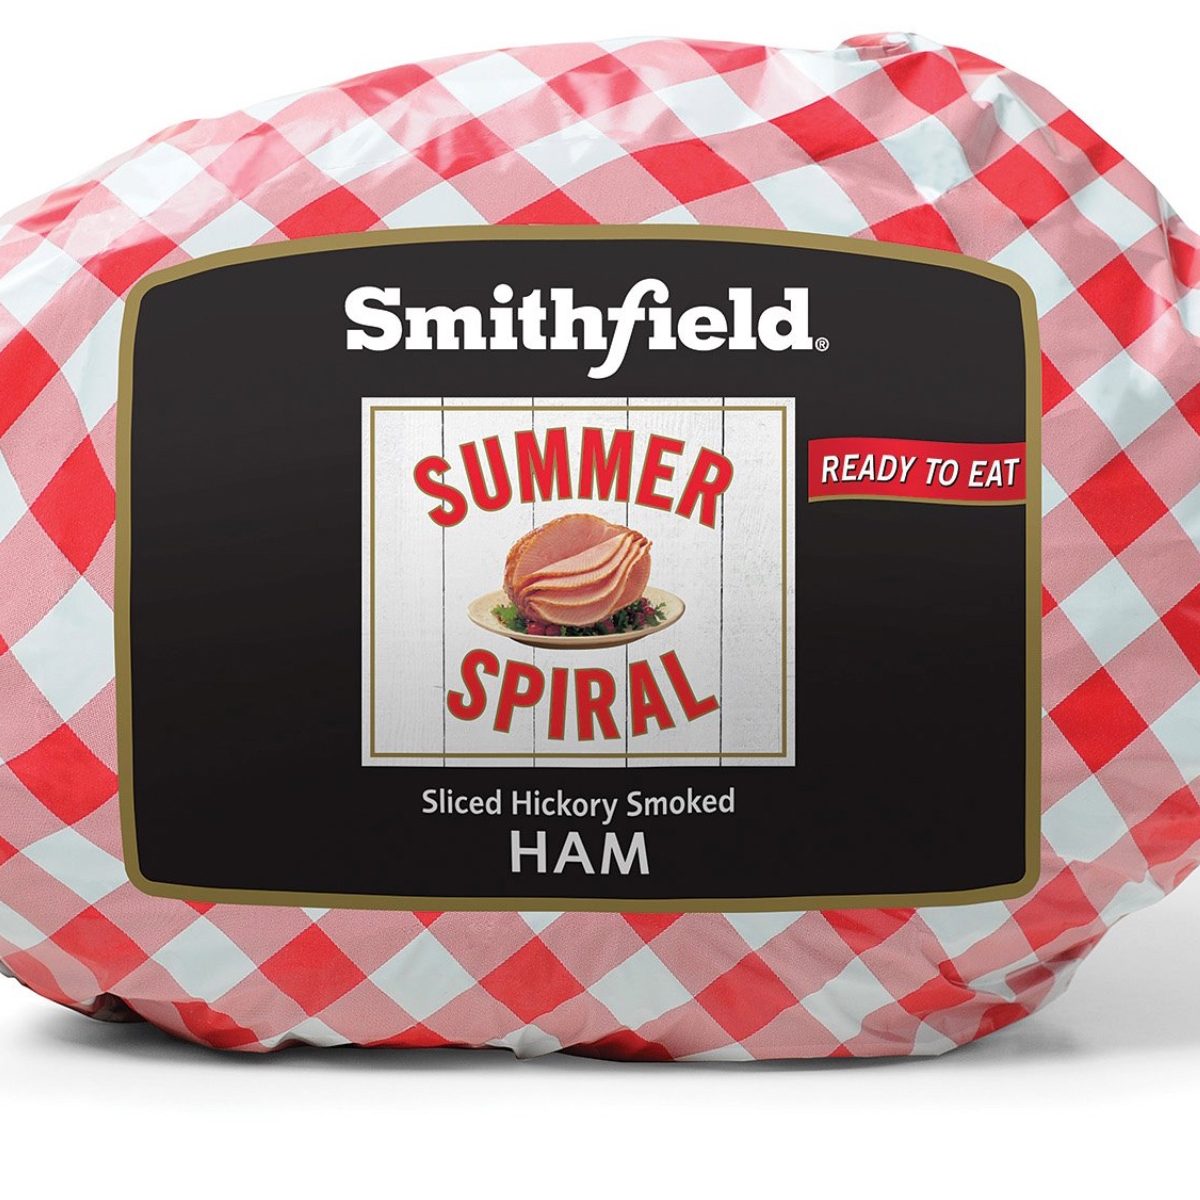 <p><strong><a class="SWhtmlLink" href="http://www.smithfield.com" rel="noopener">Smithfield</a>, Smithfield</strong></p> <p>Smithfield uses such a unique curing process for their hams it's actually protected by law. The company can only produce their hams in the town of Smithfield, VA, where the humidity, airborne enzymes and air quality are perfect to flavor the ham's rind.</p>